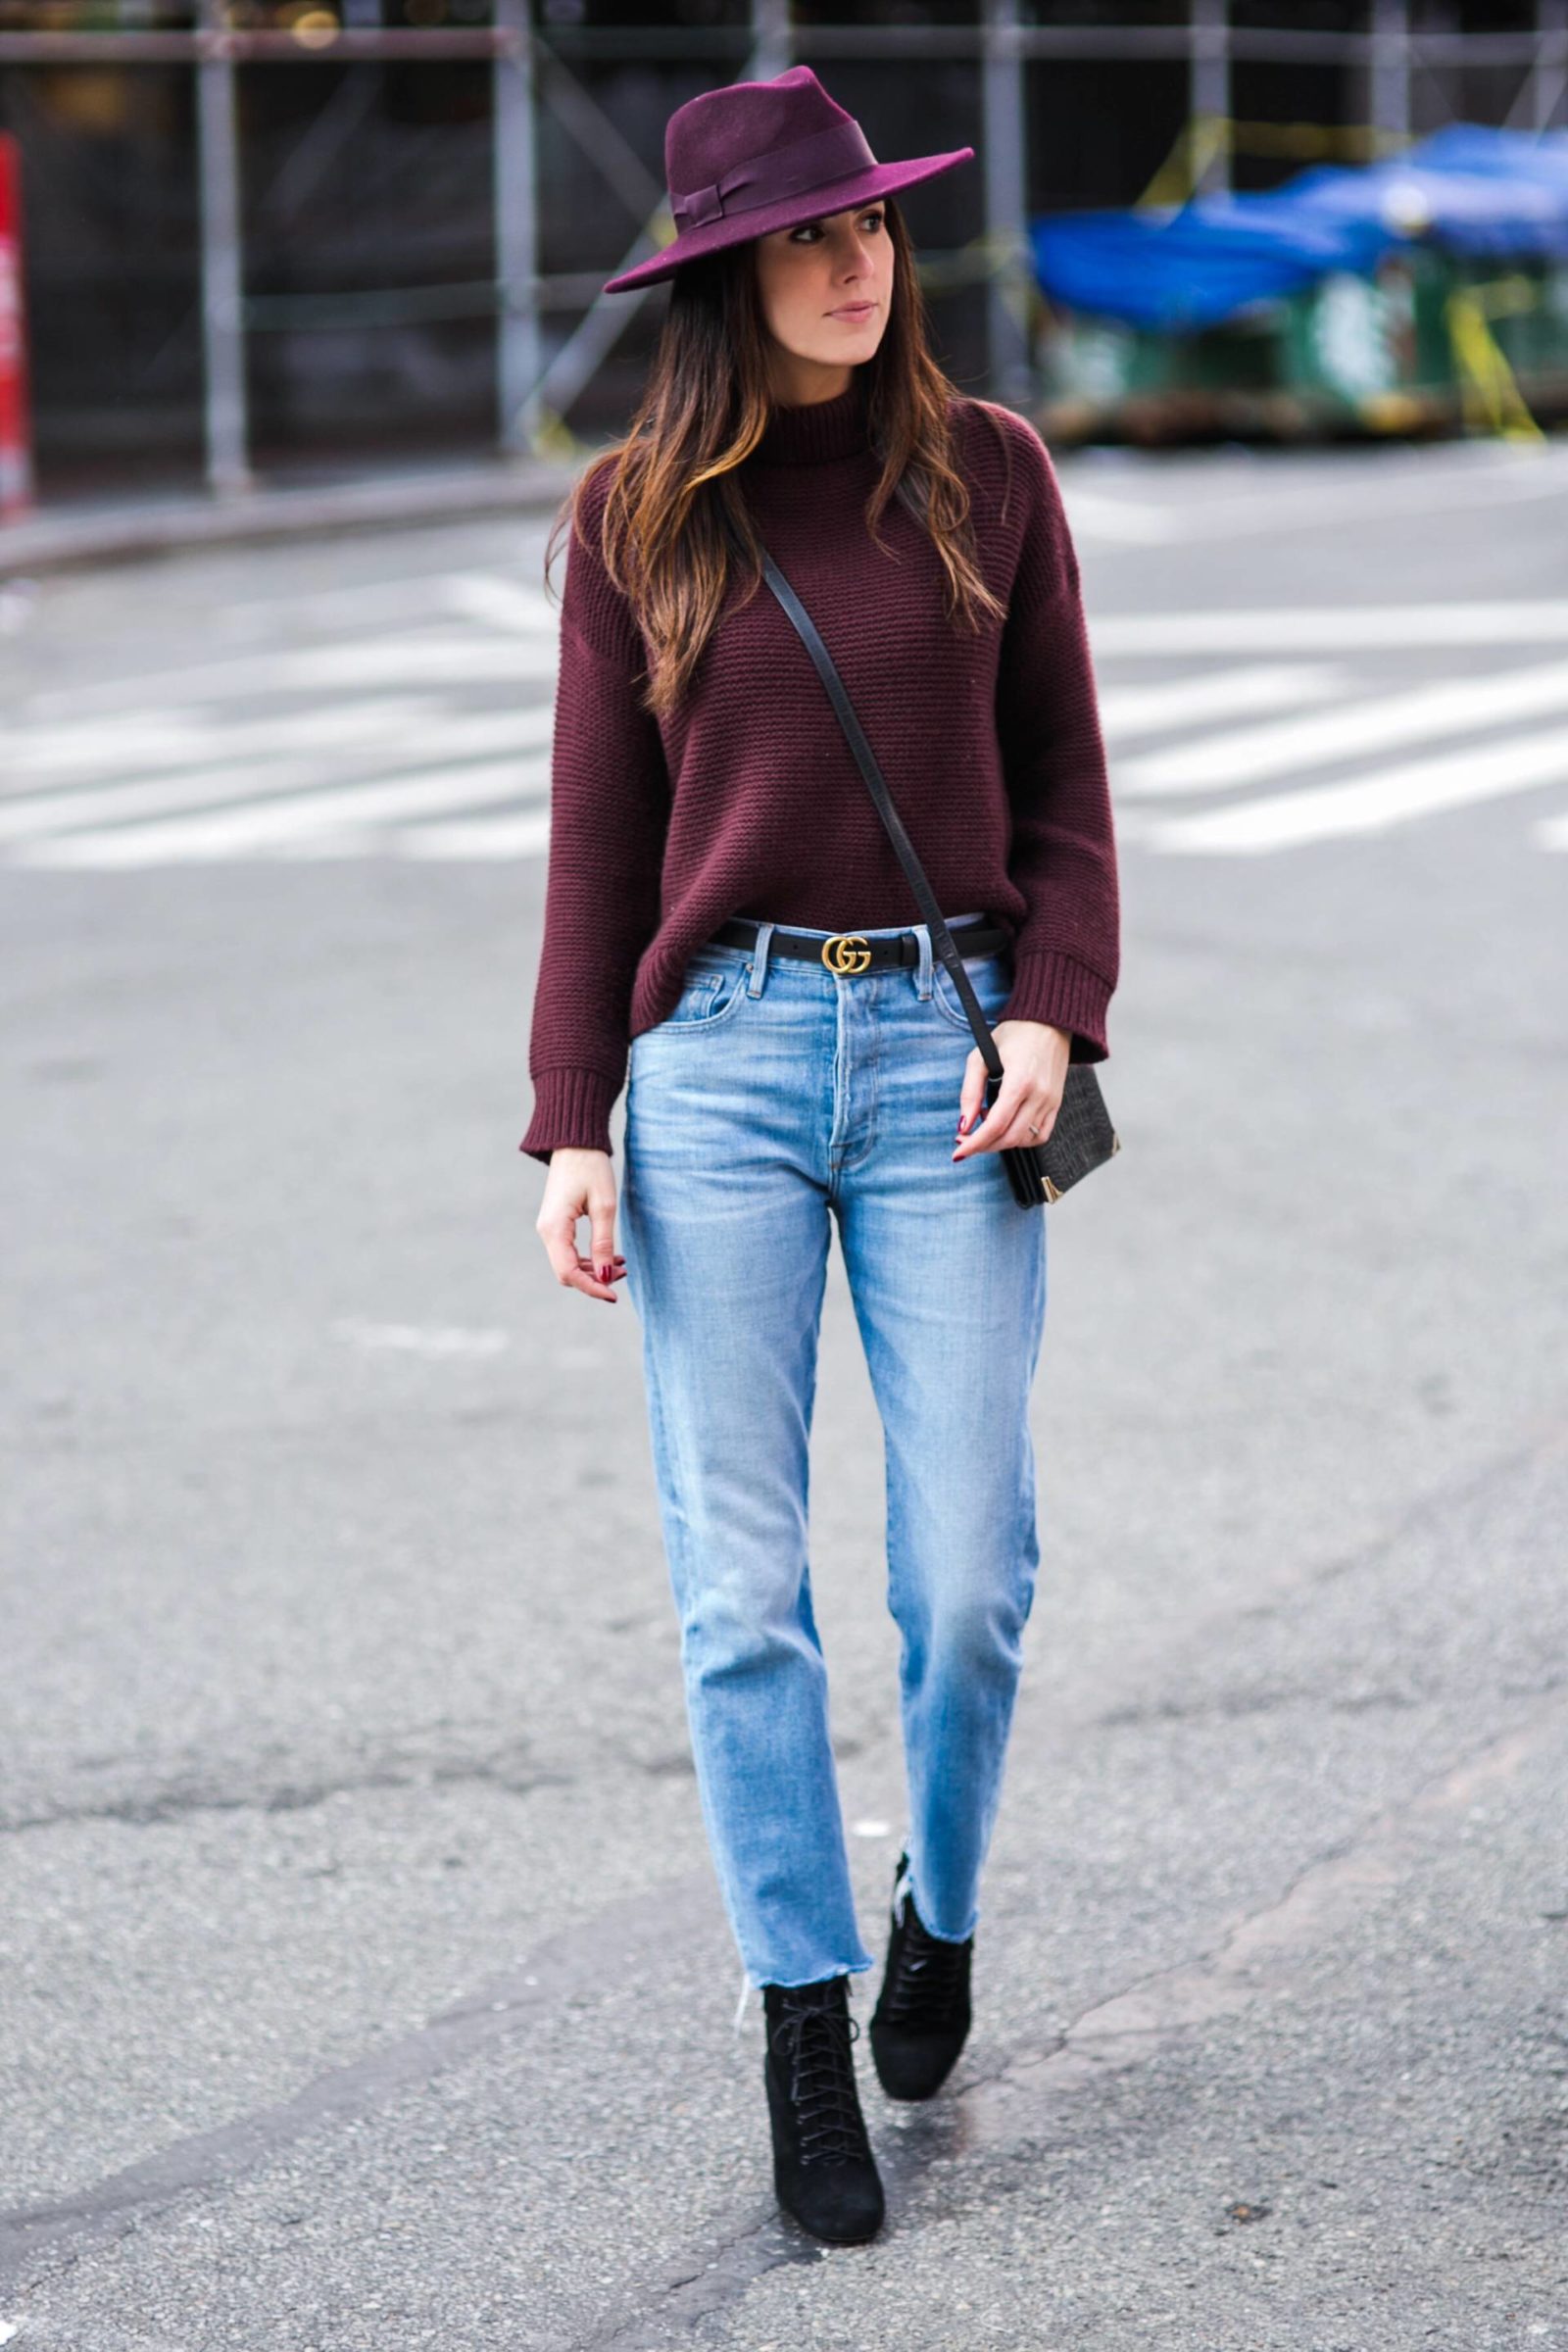 Styling Now: Slouchy Sweaters and Mom Jeans - Obsessions Now